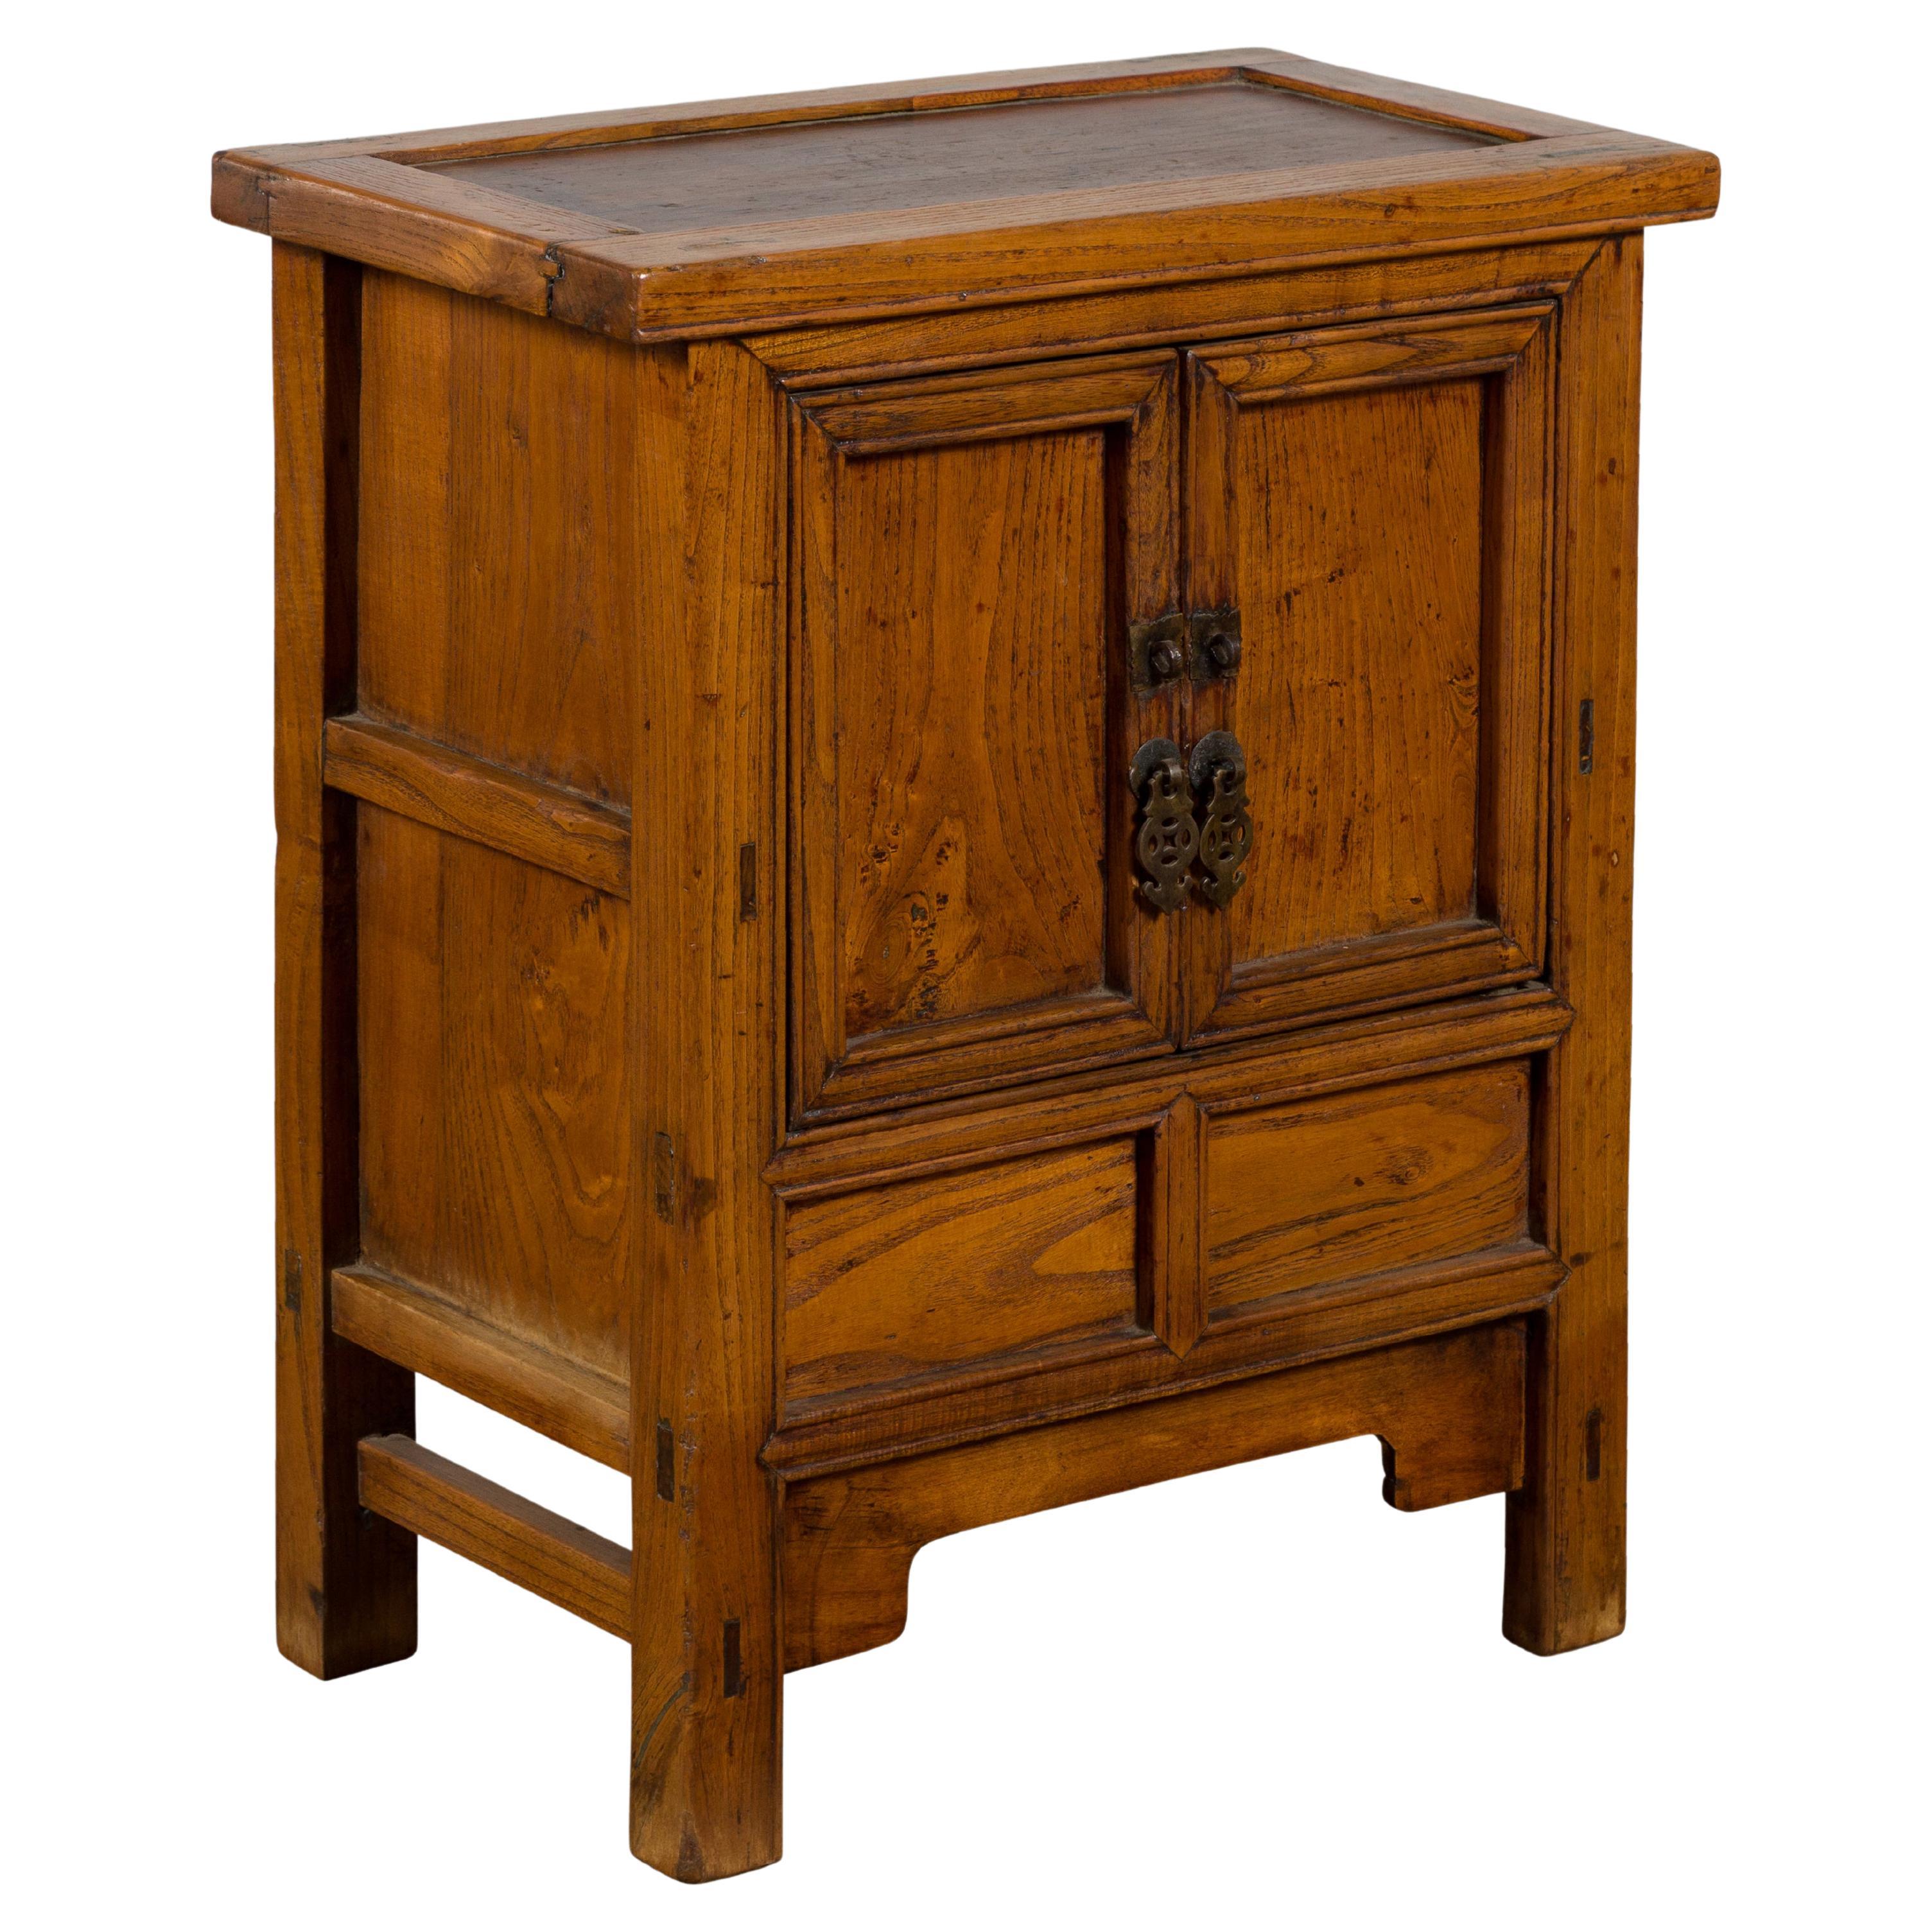 Chinese Late Qing Dynasty Period Bedside Wooden Cabinet with Two Small Doors